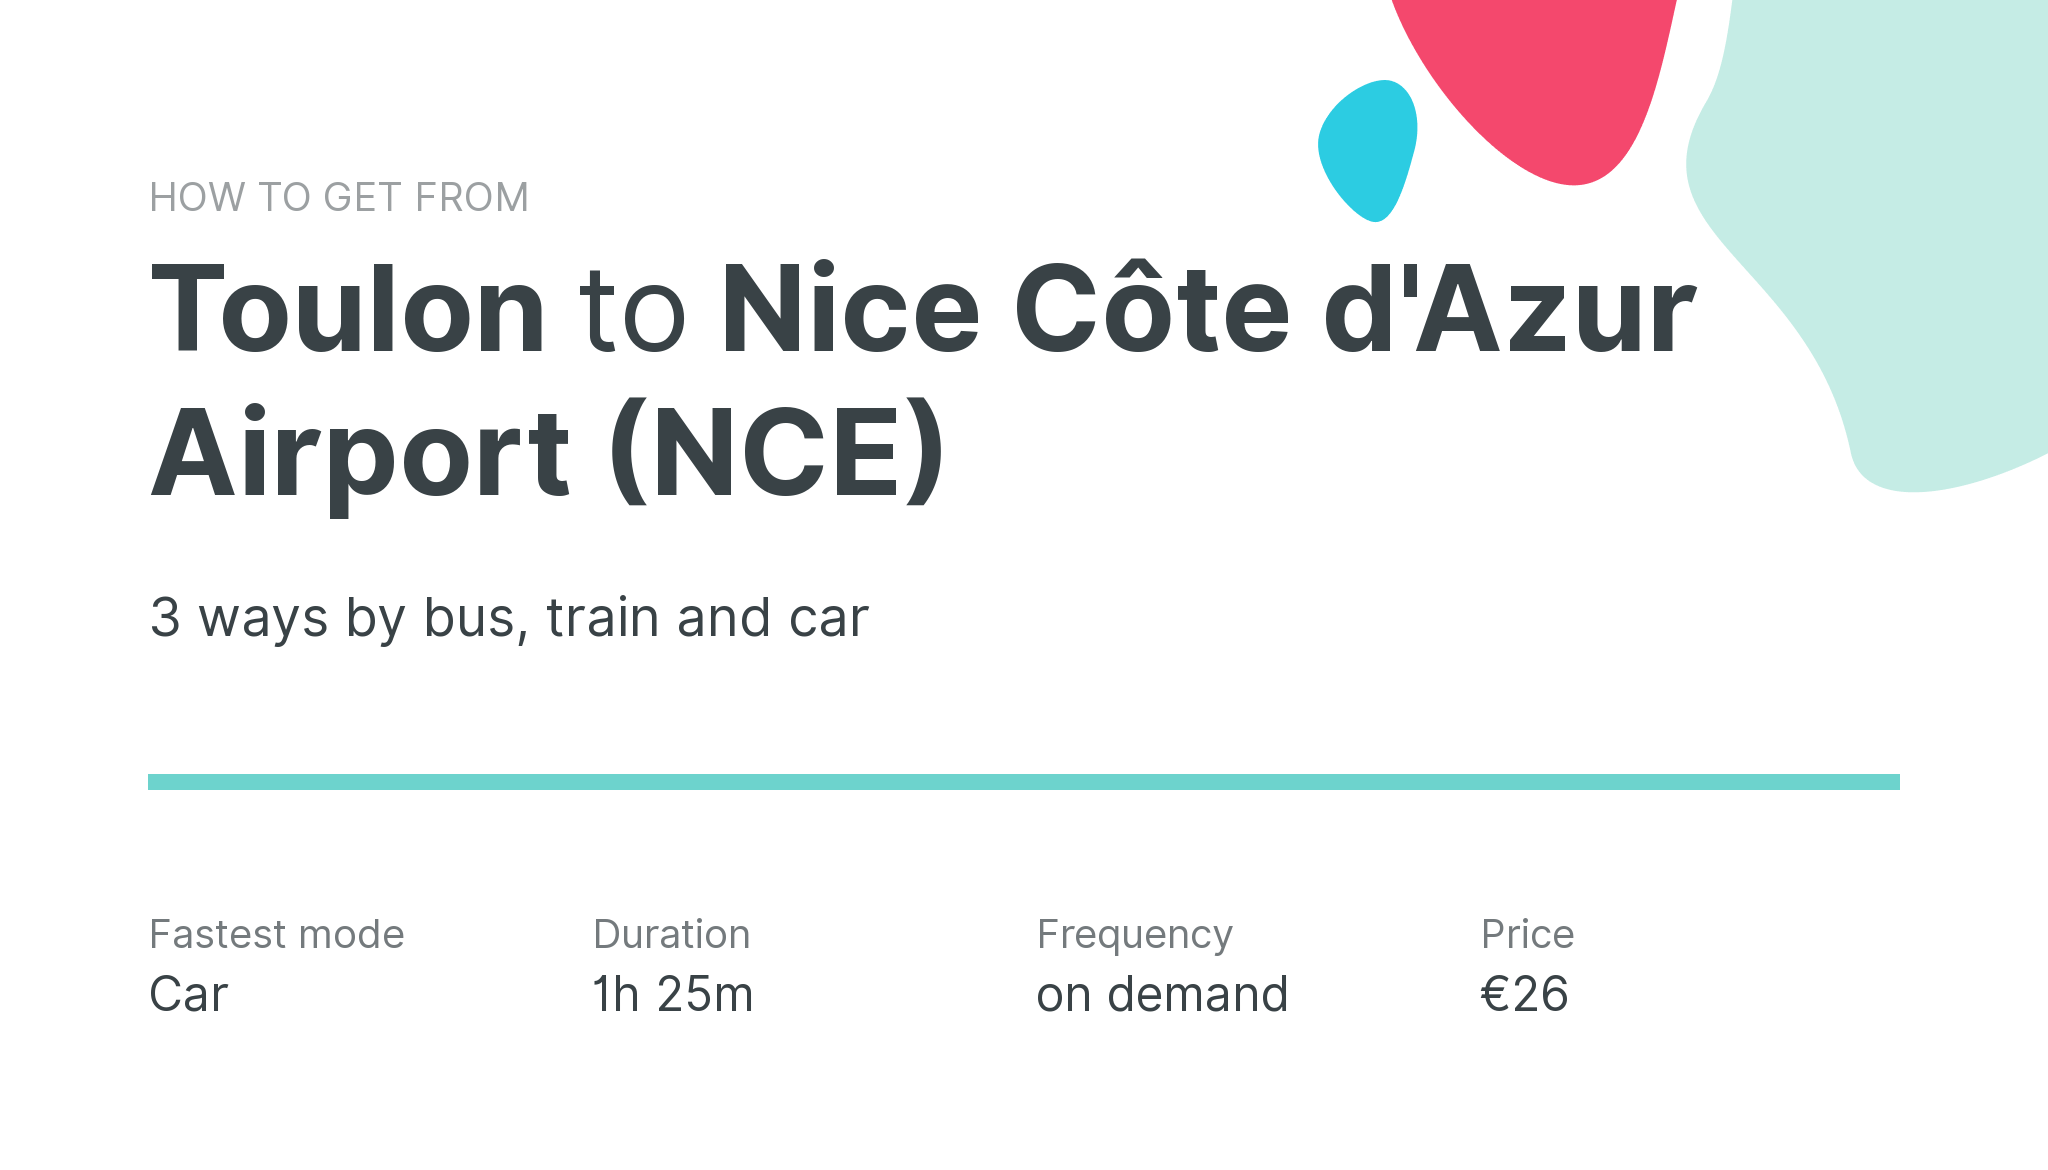 How do I get from Toulon to Nice Côte d'Azur Airport (NCE)